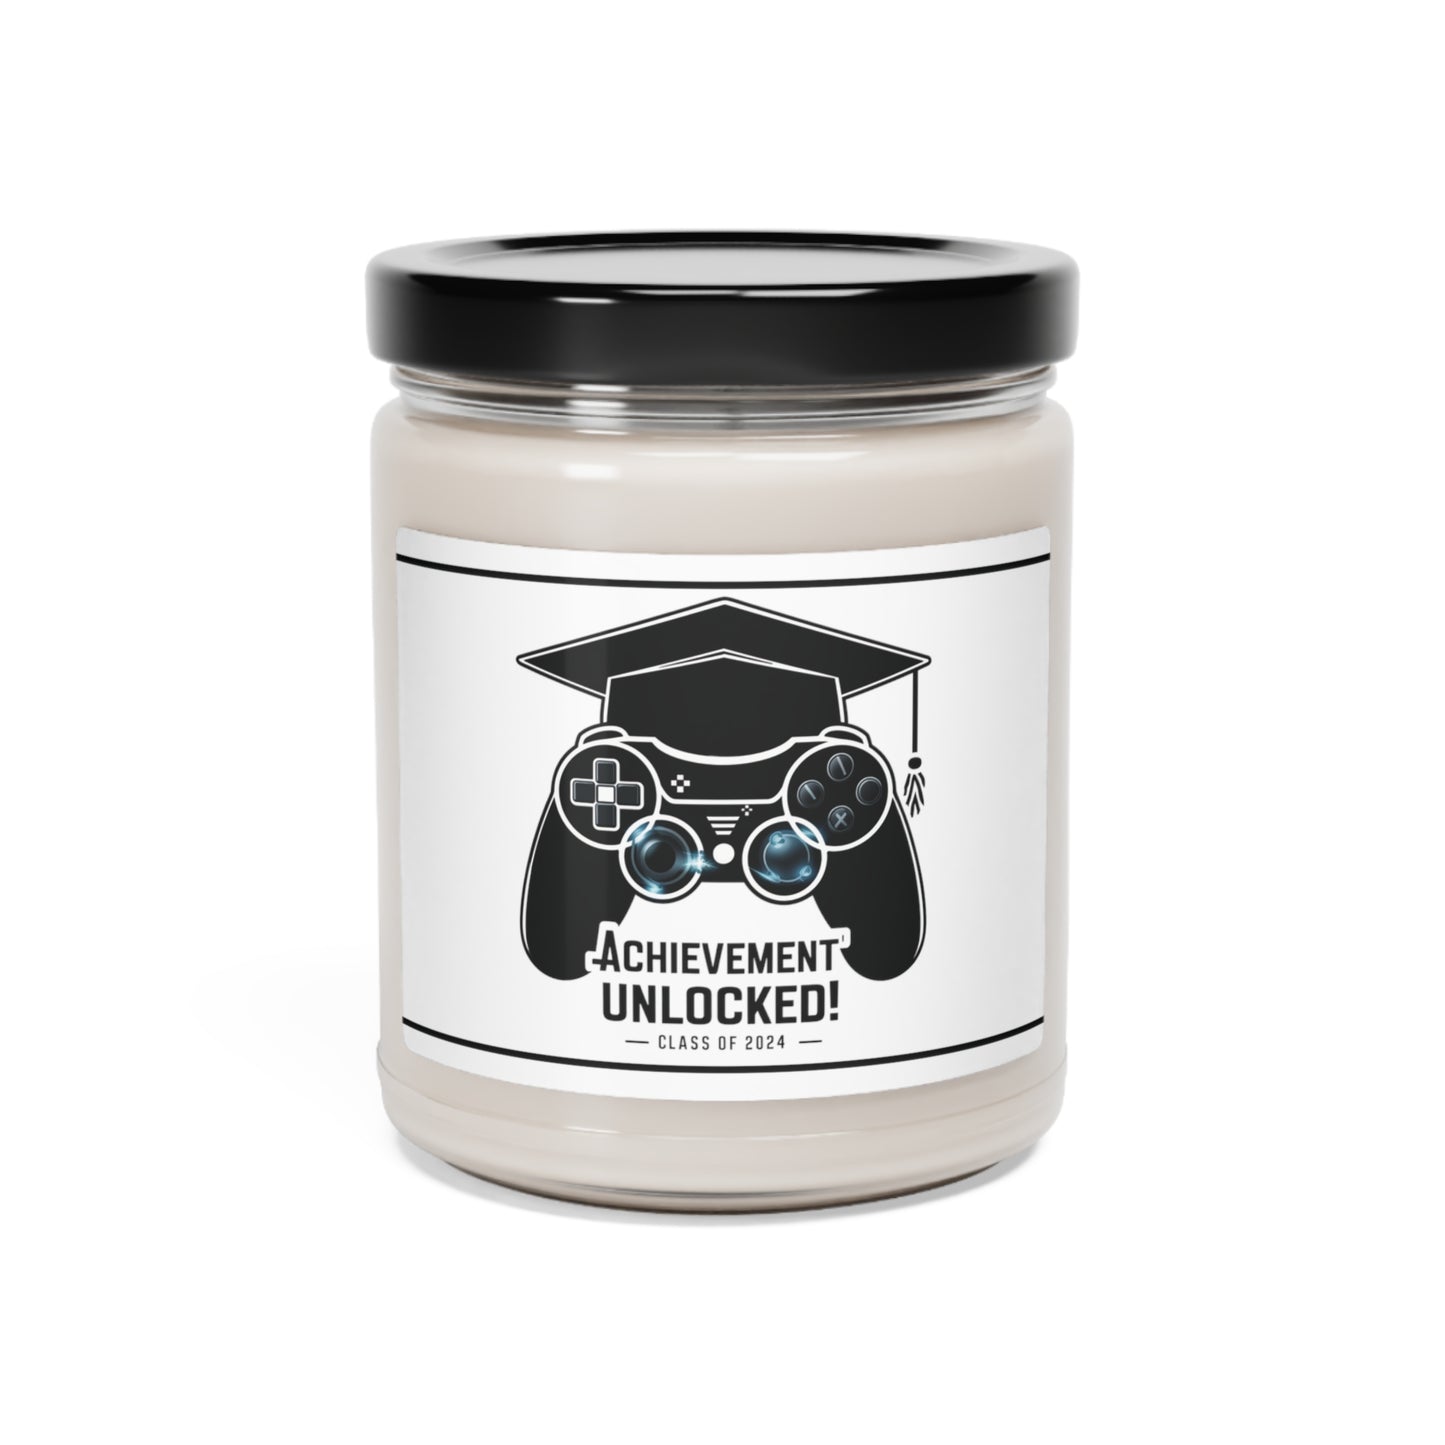 Funny Graduation Gift, Unscented Candle (Achievement Unlocked) - Grad Gift for Video Gamer